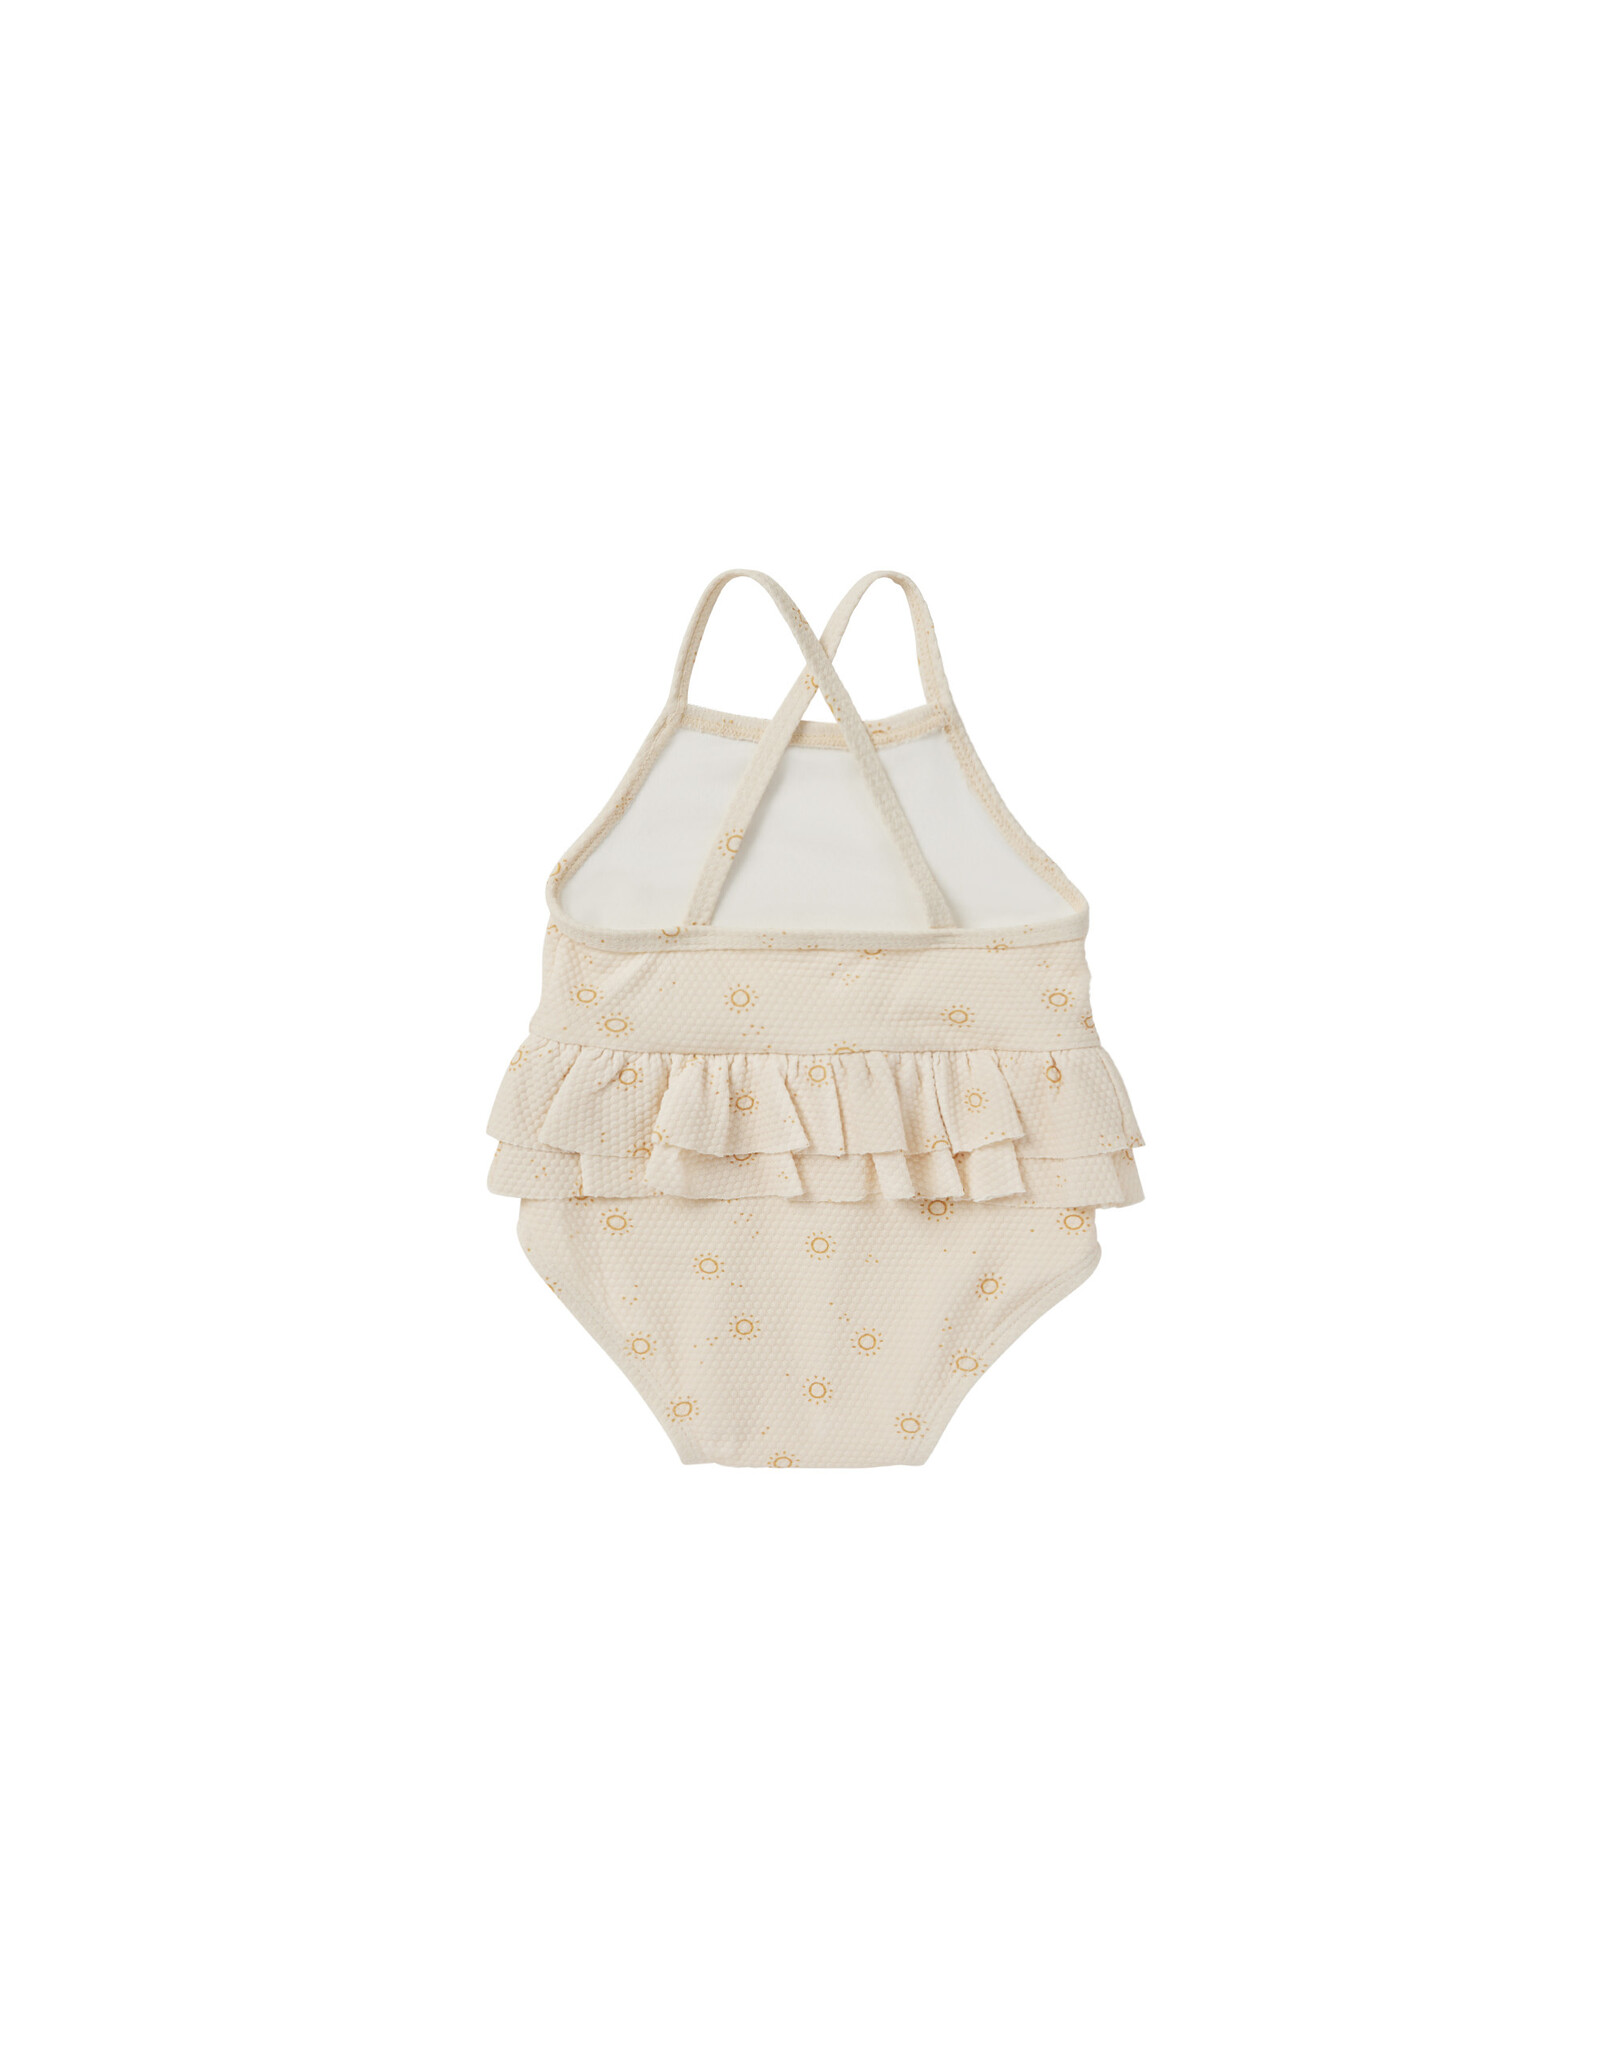 QuincyMae 0-3MO: Ruffled One-Piece Swimsuit - Suns